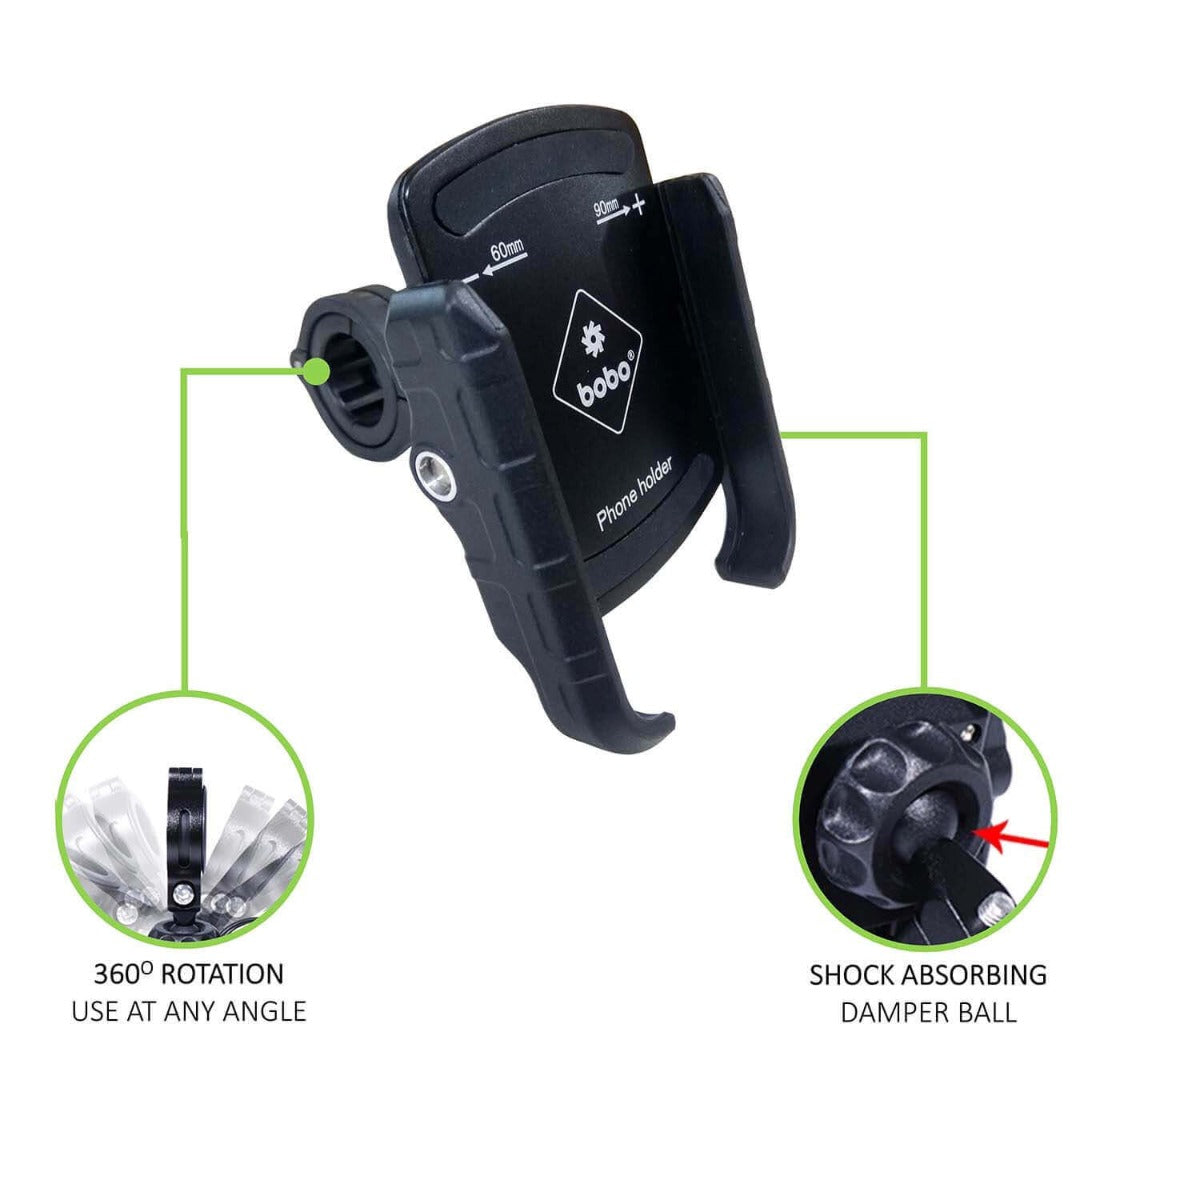 BOBO BM4 JAW-GRIP MOBILE HOLDER WITHOUT CHARGER